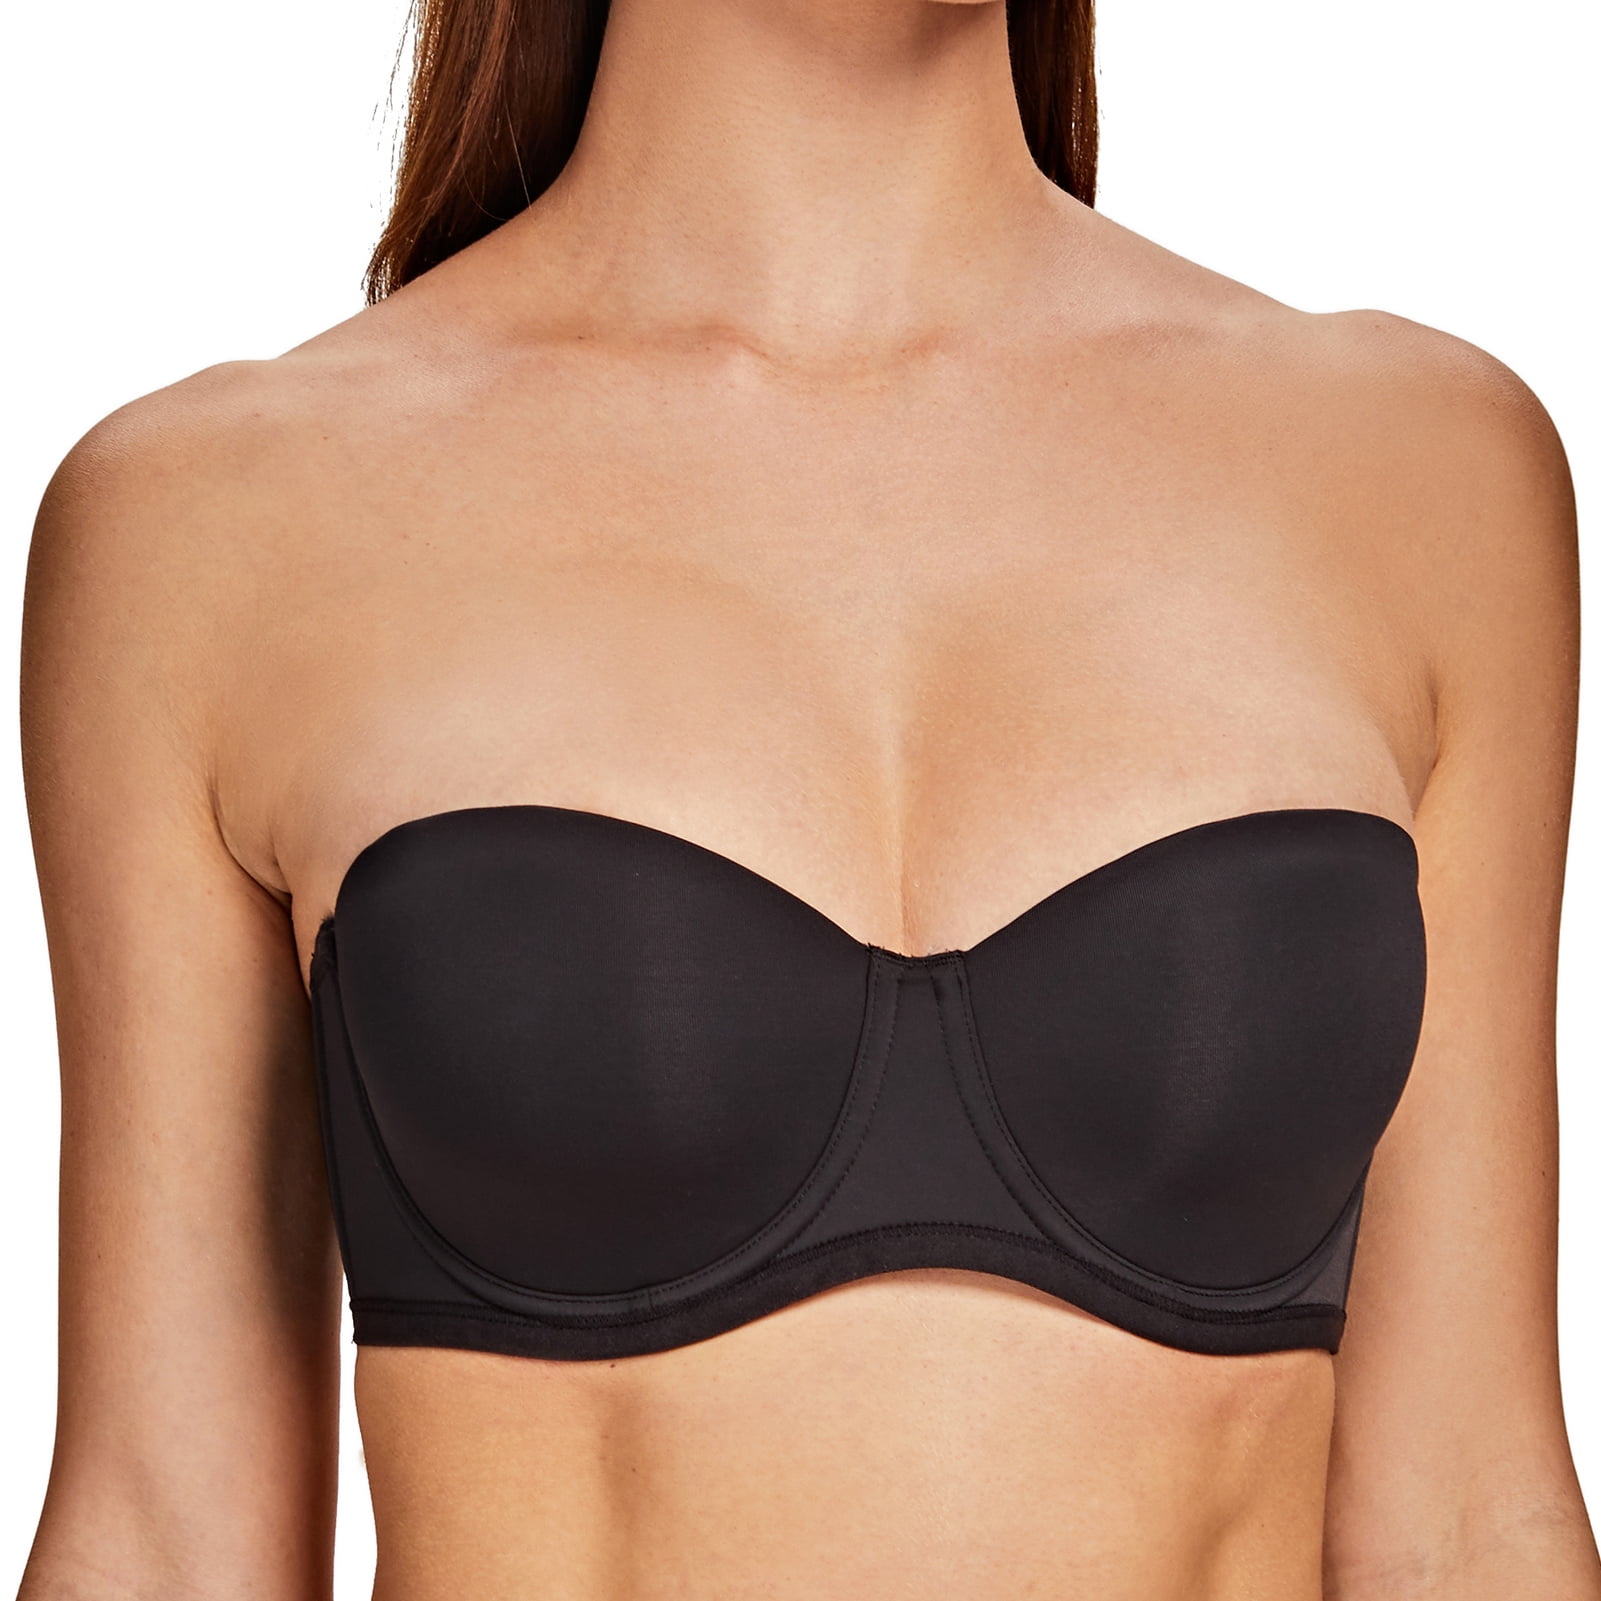  Womens Seamless Underwire Bandeau Minimizer Strapless Bra  For Big Busted Women Black 42F